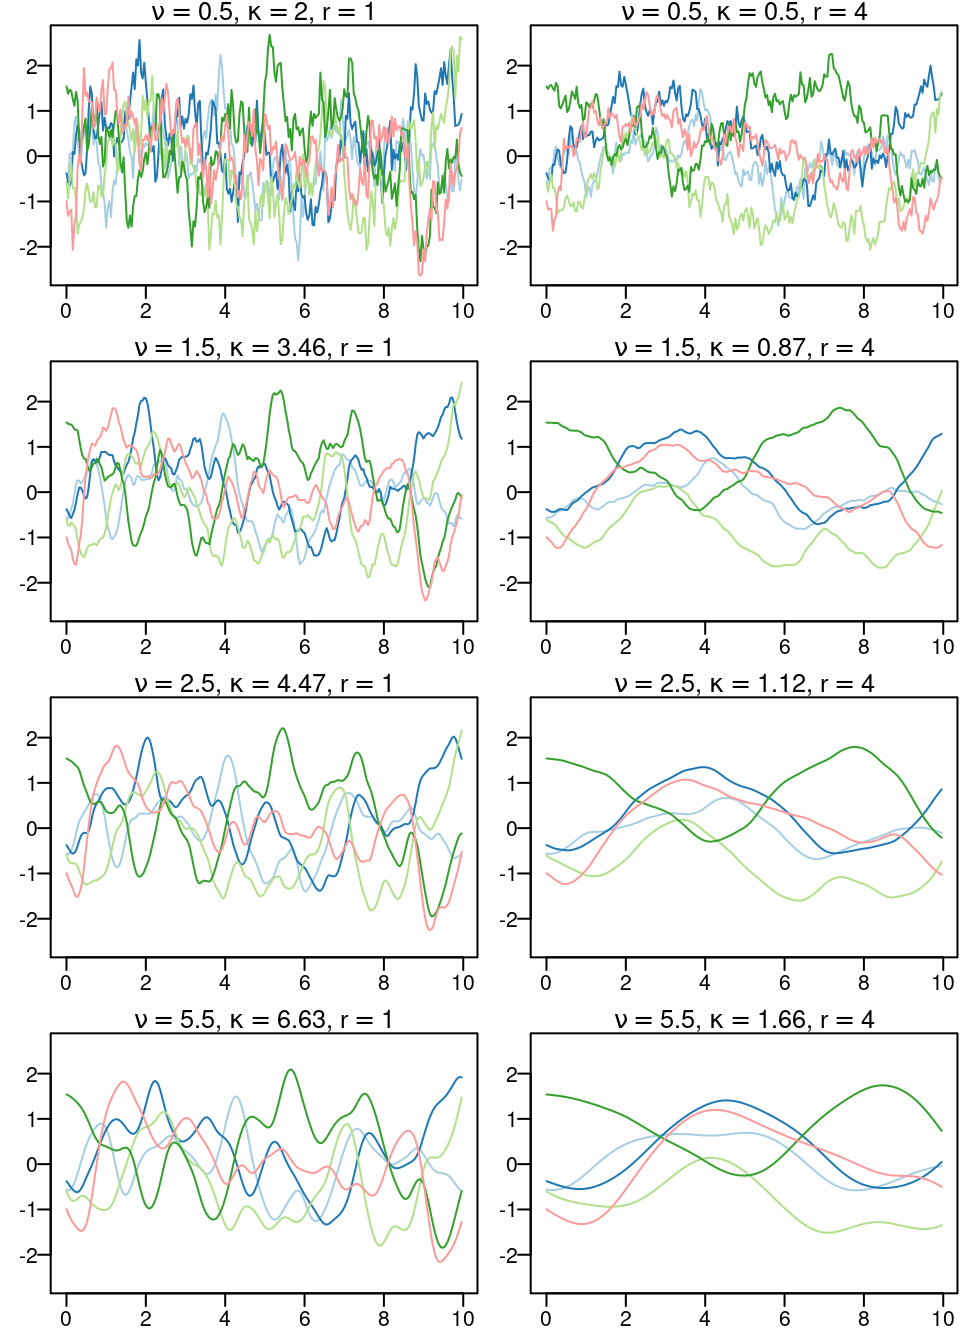 Five samples from the one-dimensional Matérn correlation function for two different range values (each column of plots) and four different values for the smoothness parameter (each line of plots).